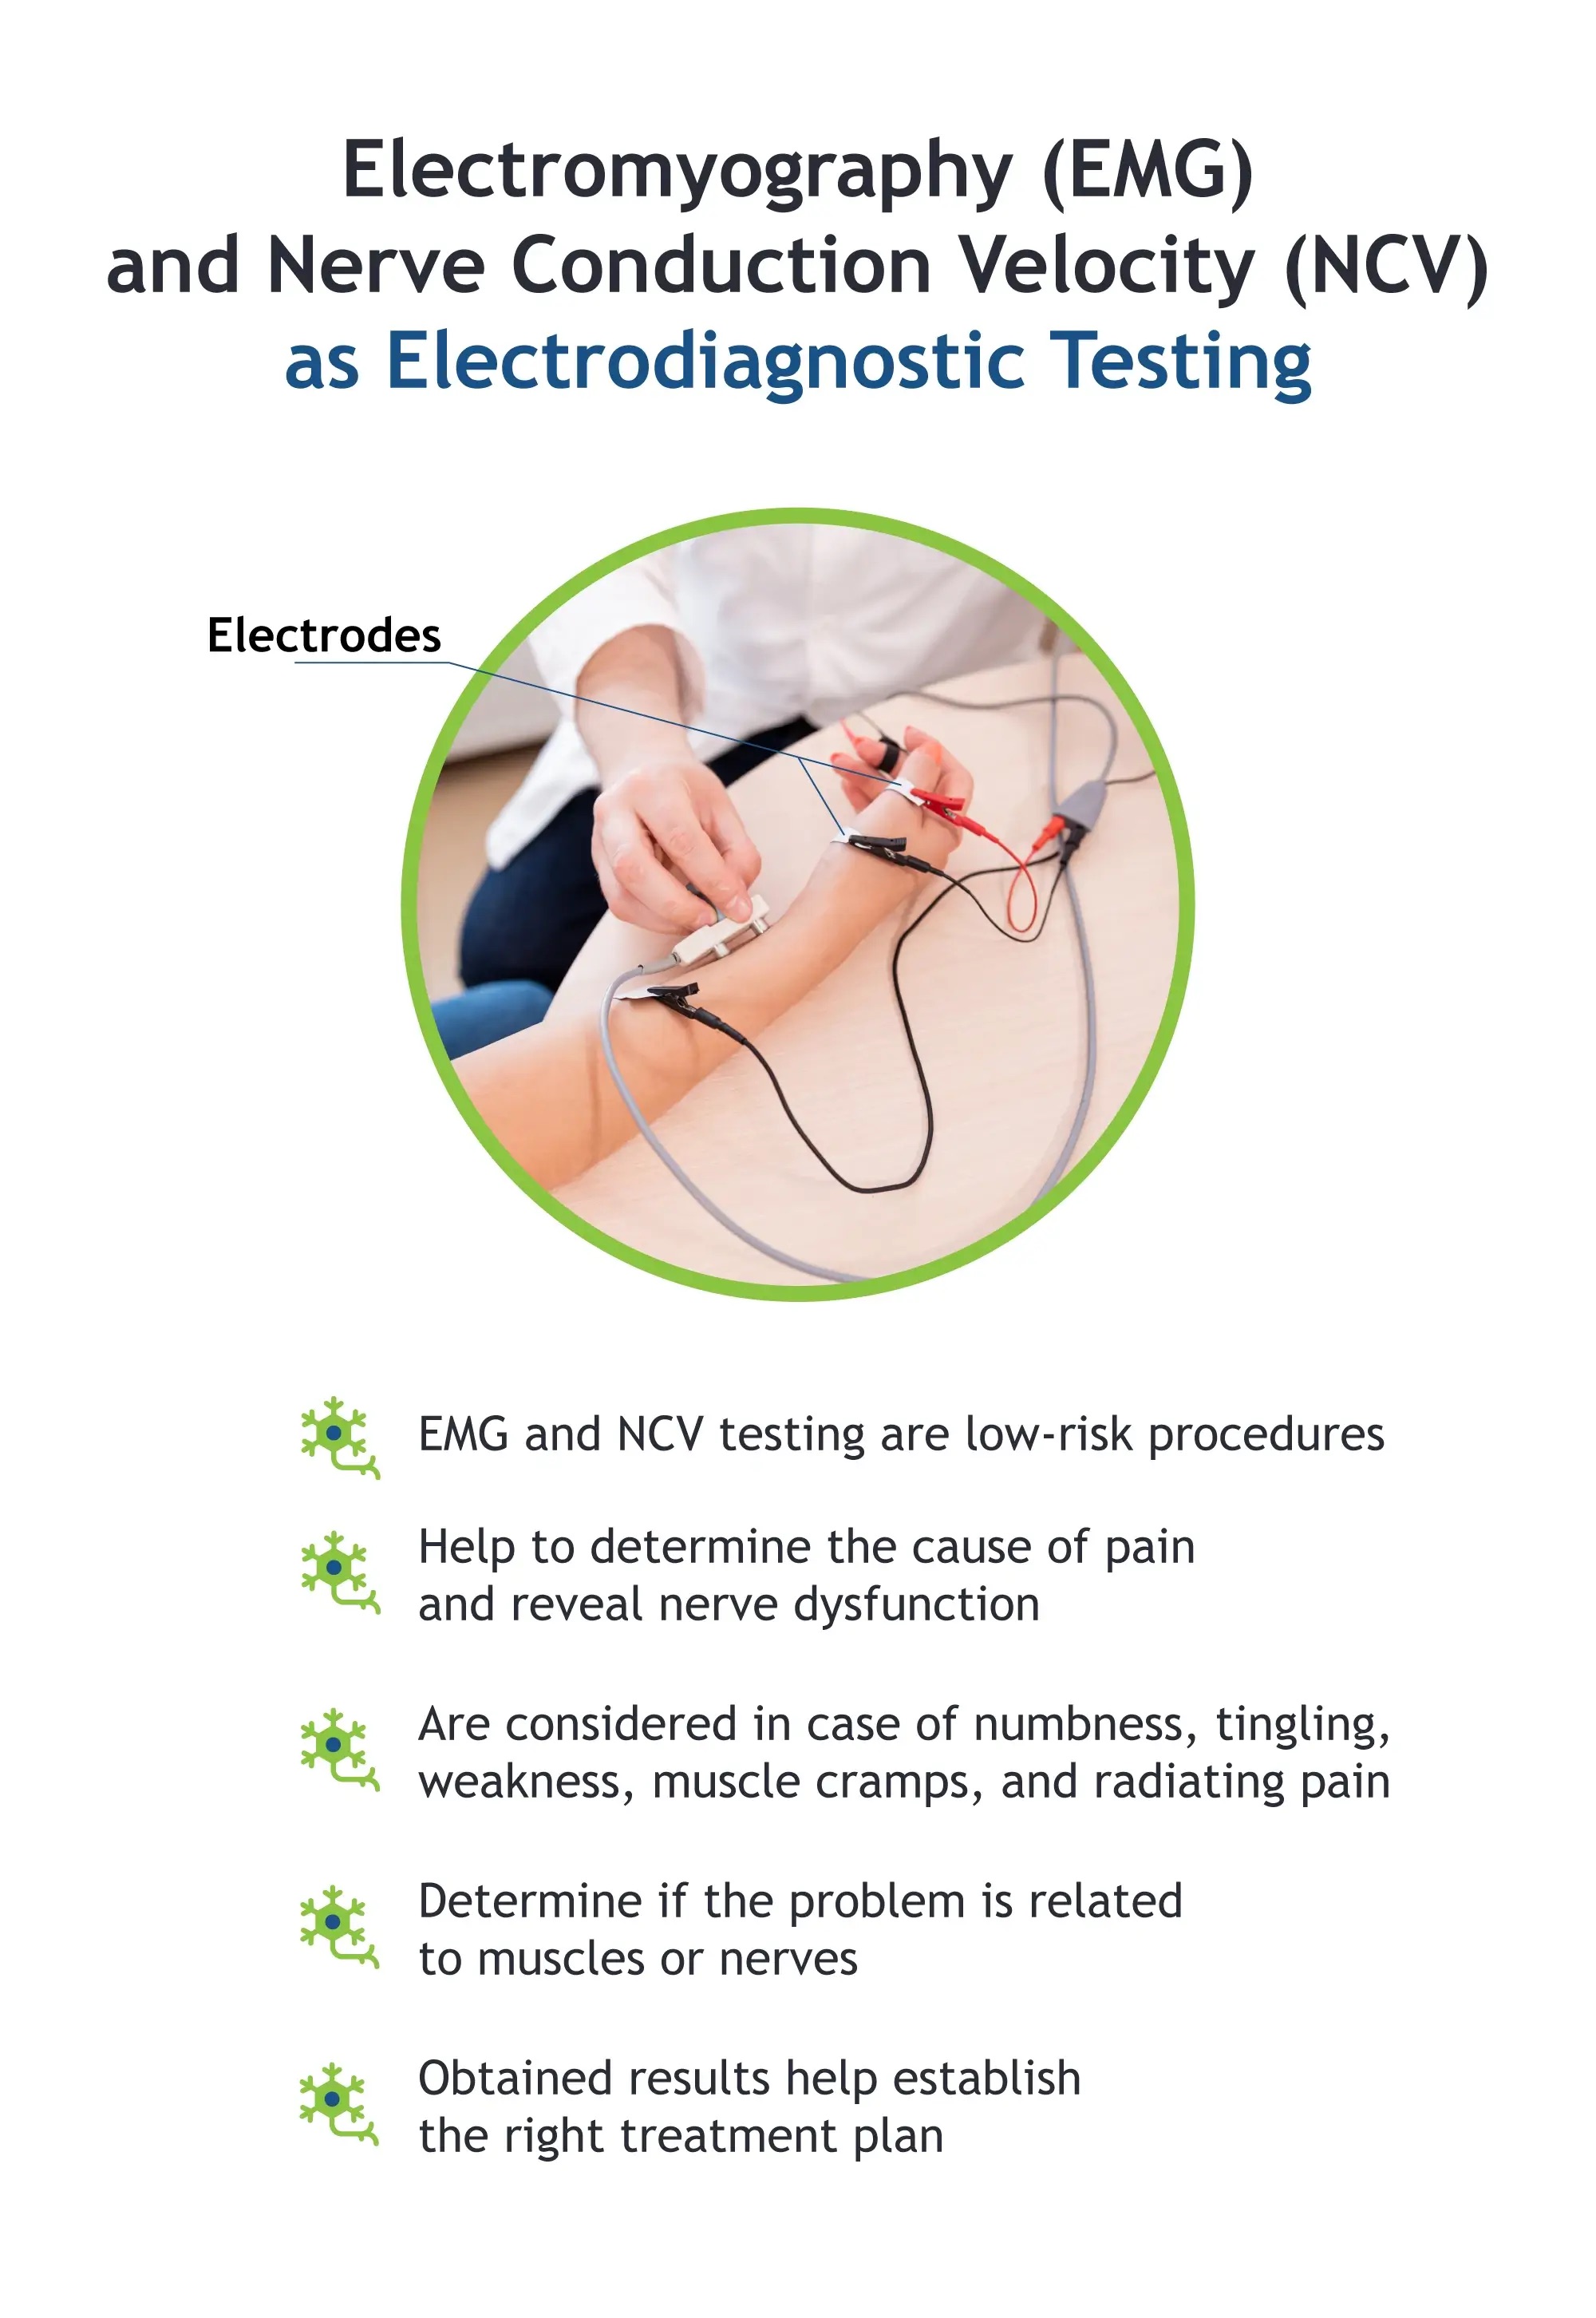 An infographic describing EMG and NCV as electrodiagnostic testing.